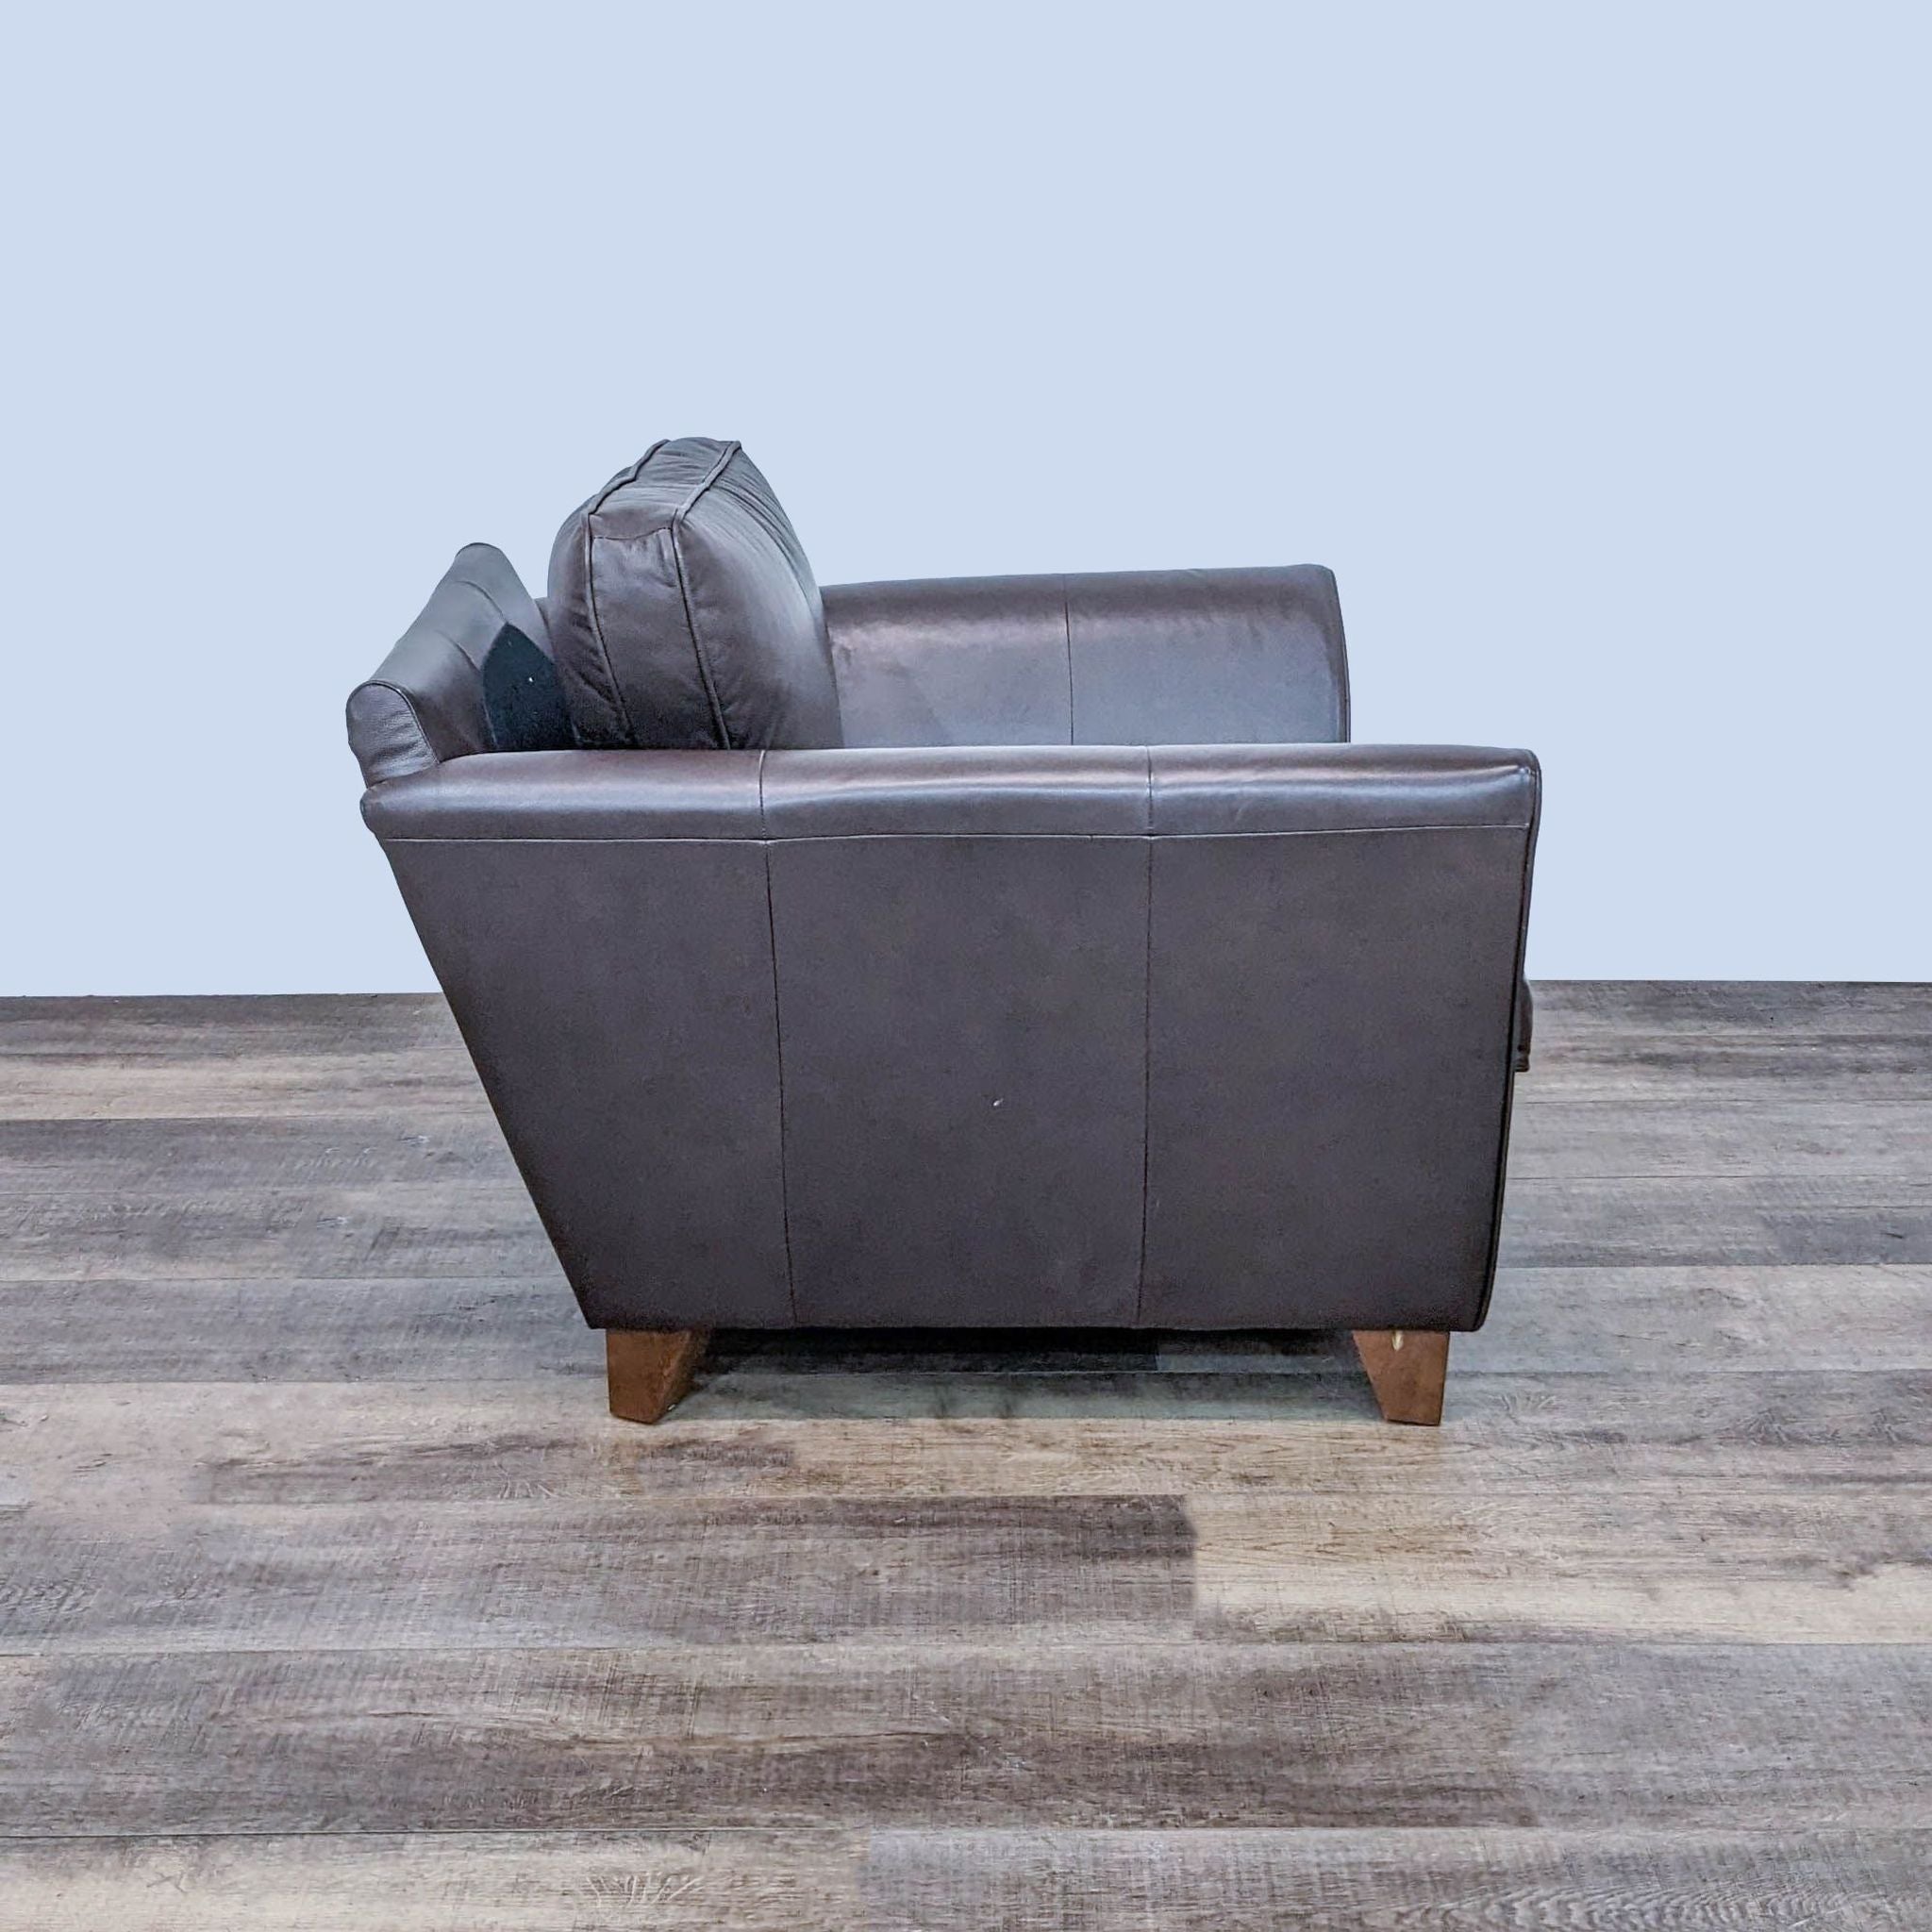 Rear view of a Marks & Spencer dark leather chair with tapered wooden legs, showing the armchair’s high back and side contours.